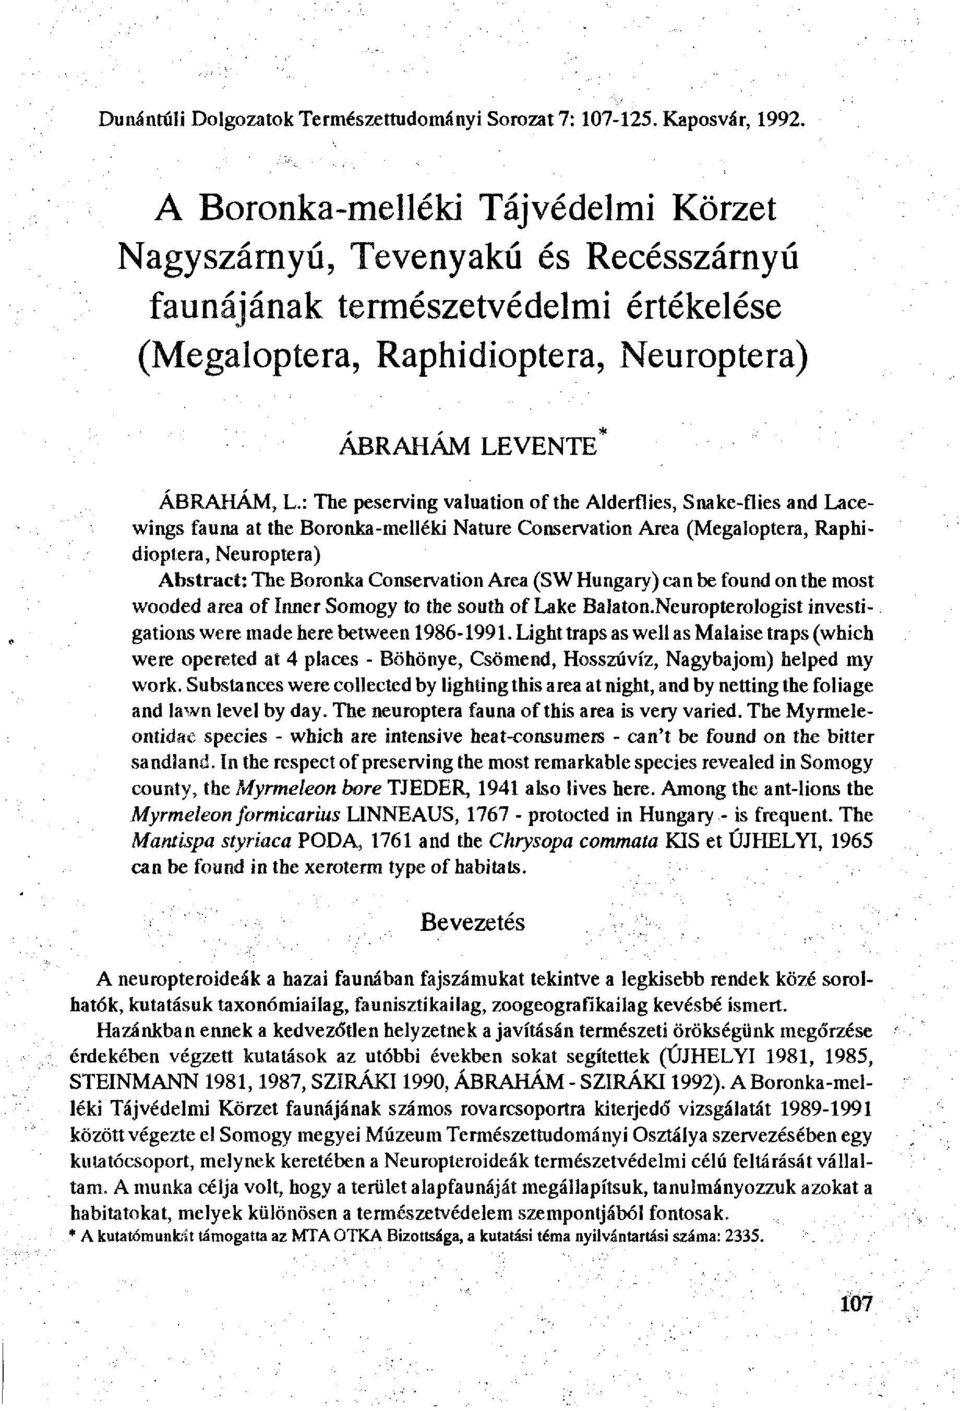 : The peserving valuation of the Alderflies, Snake-flies and Lacewings fauna at the Boronka-melléki Nature Conservation Area (Megaloptera, Raphidioptera, Neuroptera) Abstract: The Boronka